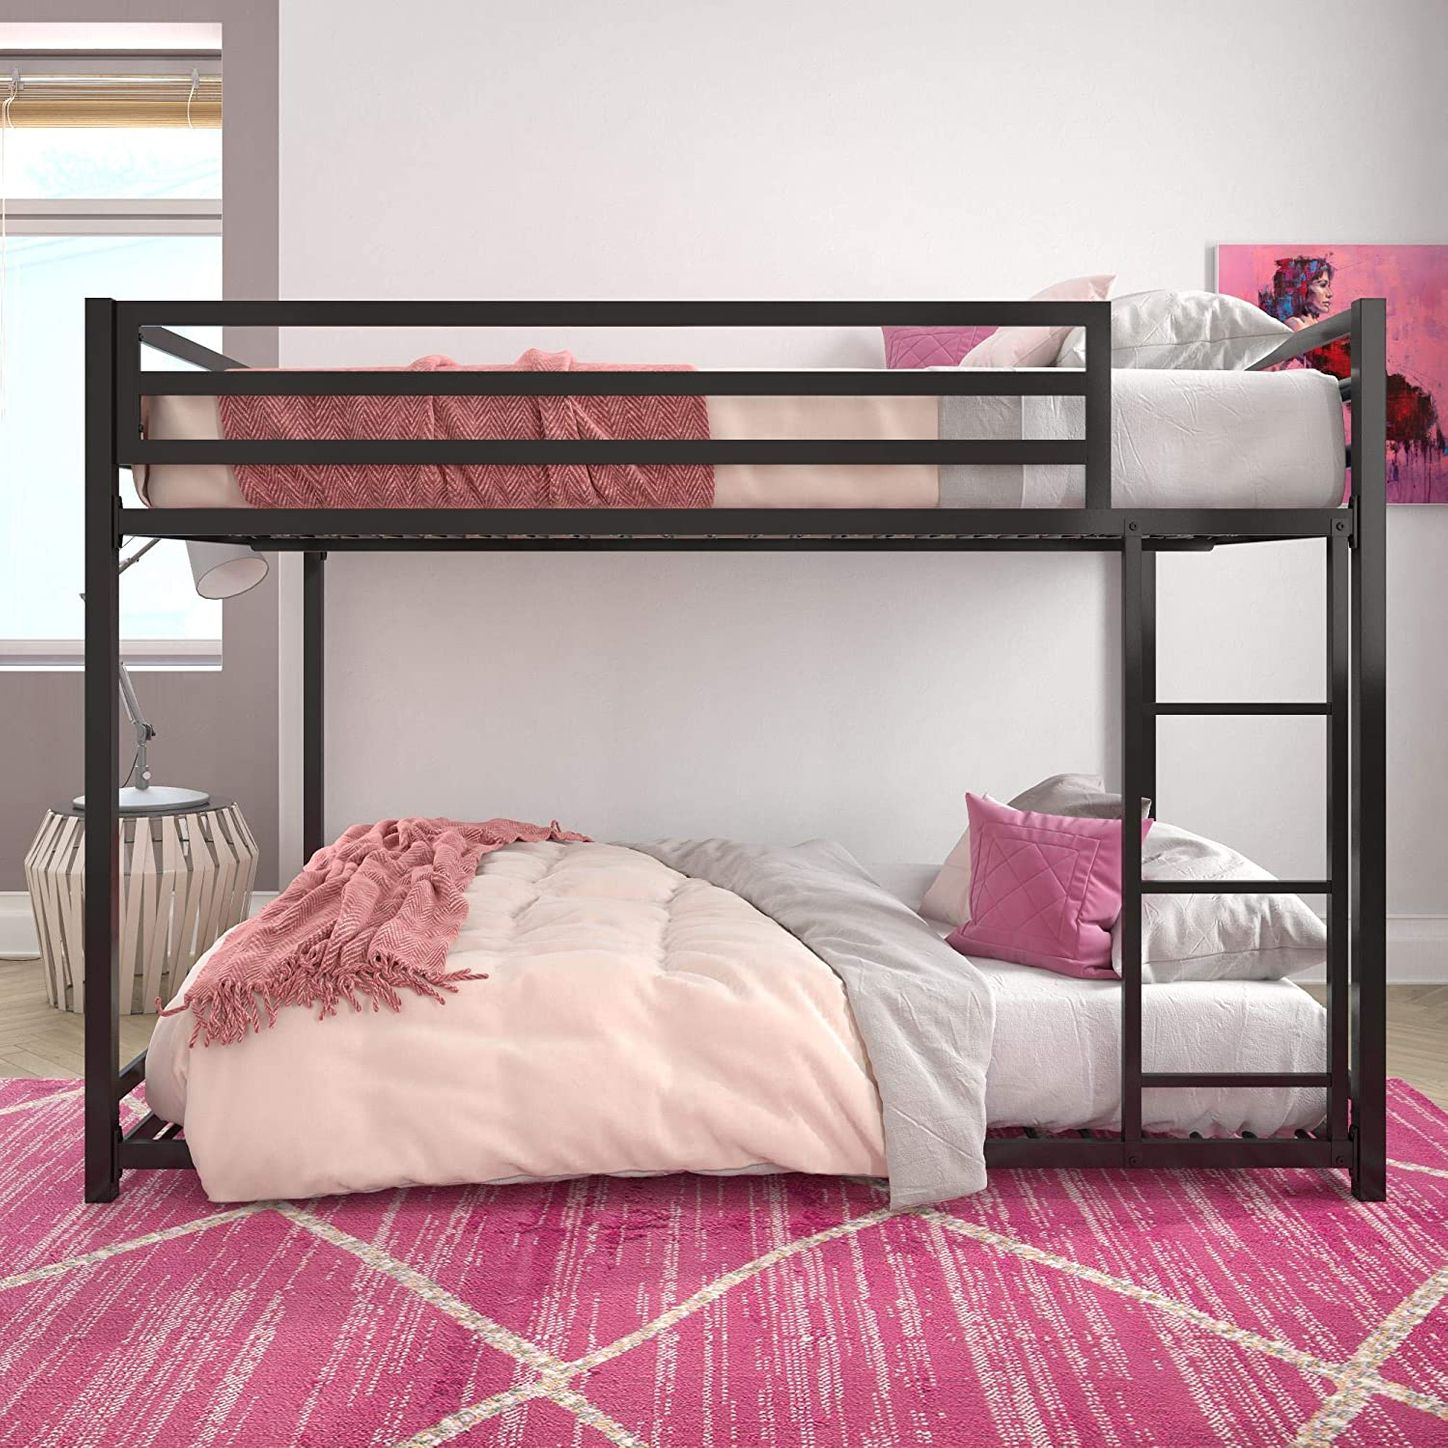 8 Best Bunk Beds 2020 The Strategist, 2 Full Size Bunk Beds